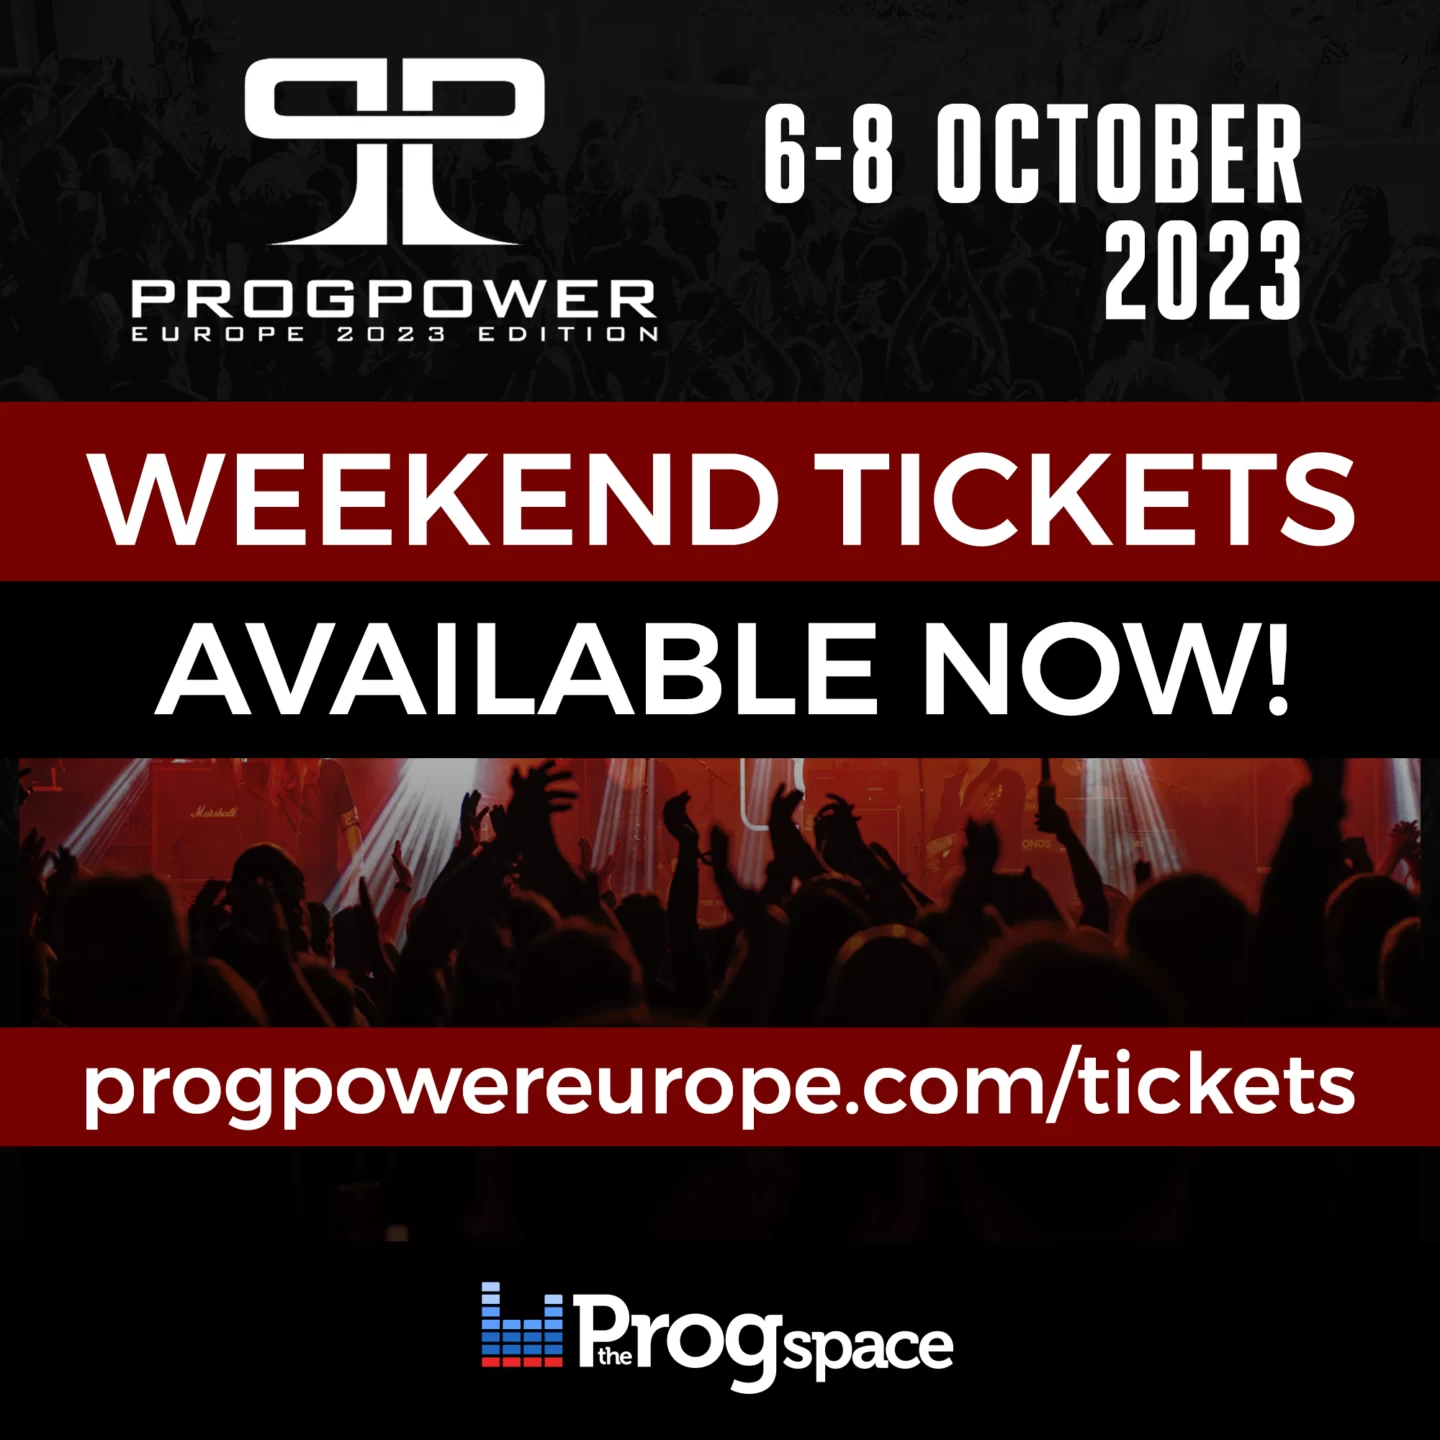 ProgPower Europe Weekend Tickets are here!